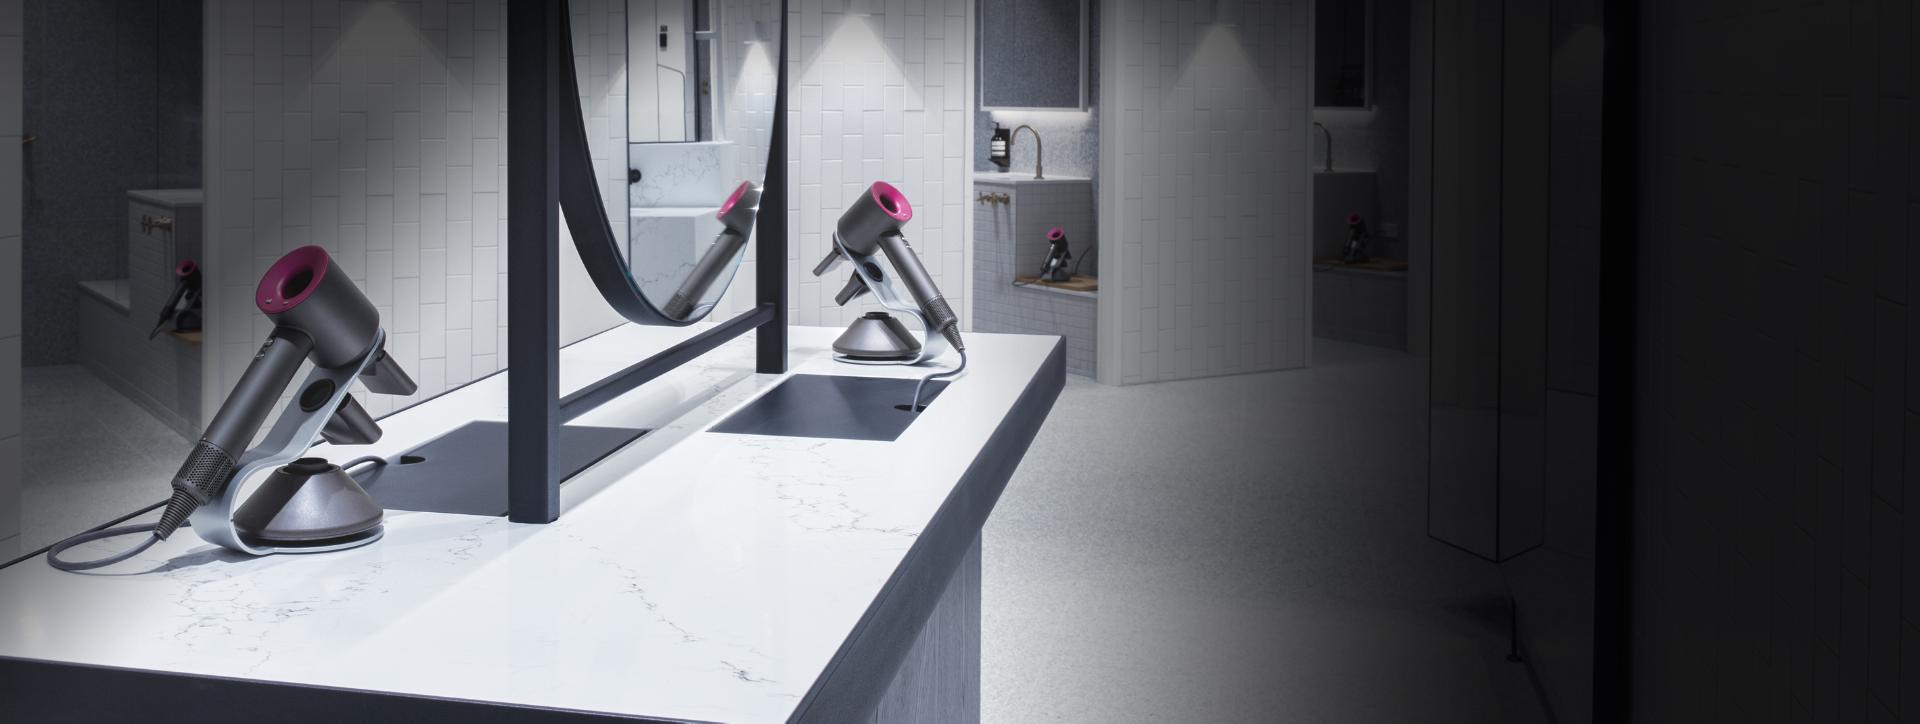 Image of Dyson Supersonics in a dressing room